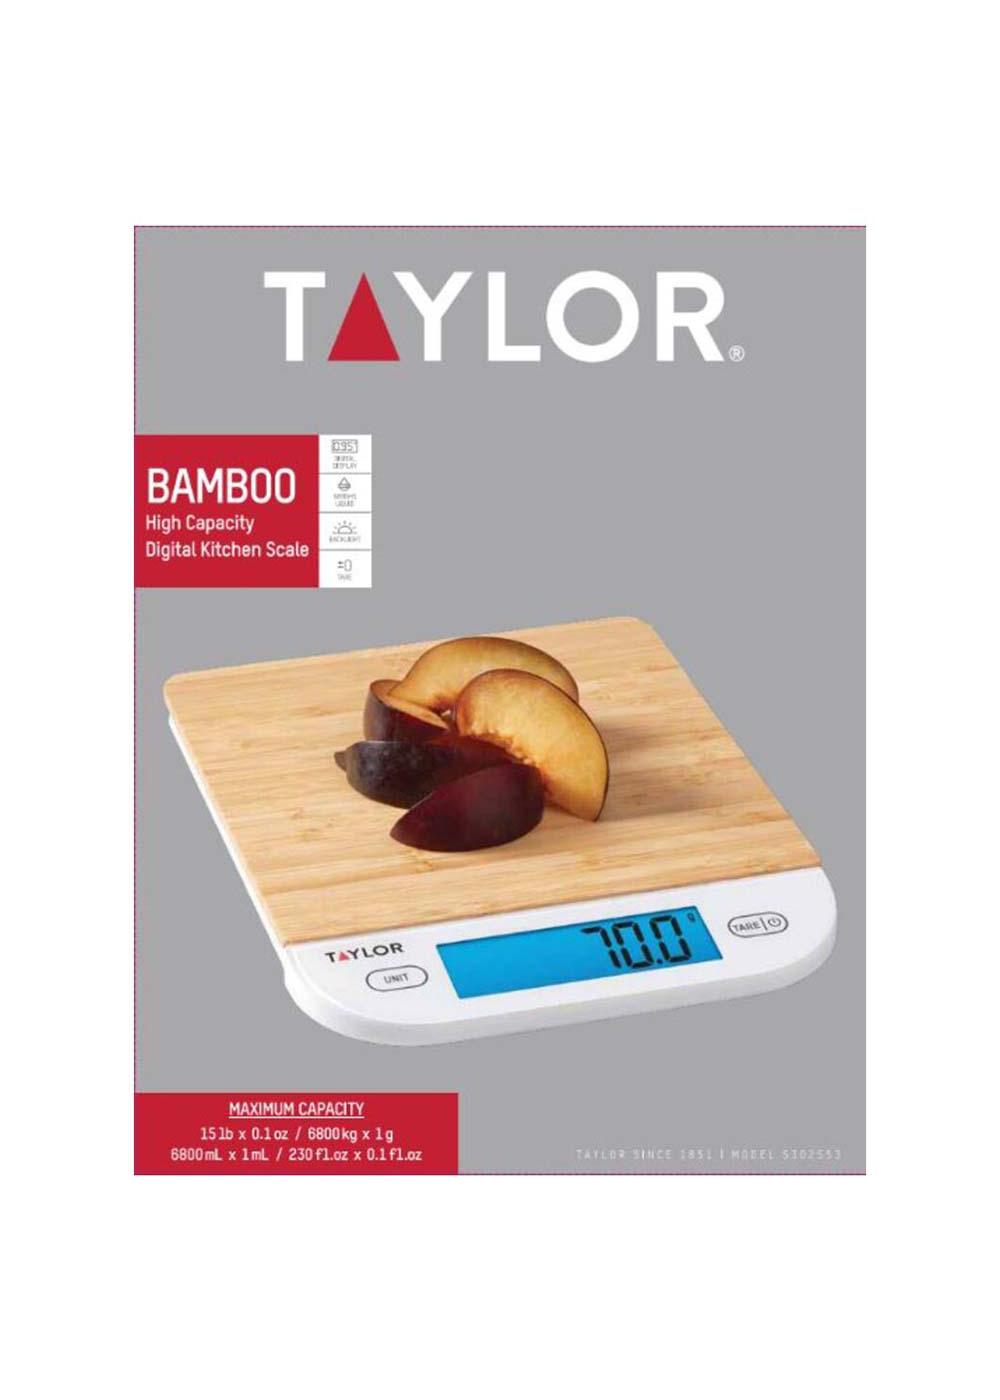 Taylor Bamboo Digital Kitchen Scale; image 1 of 3